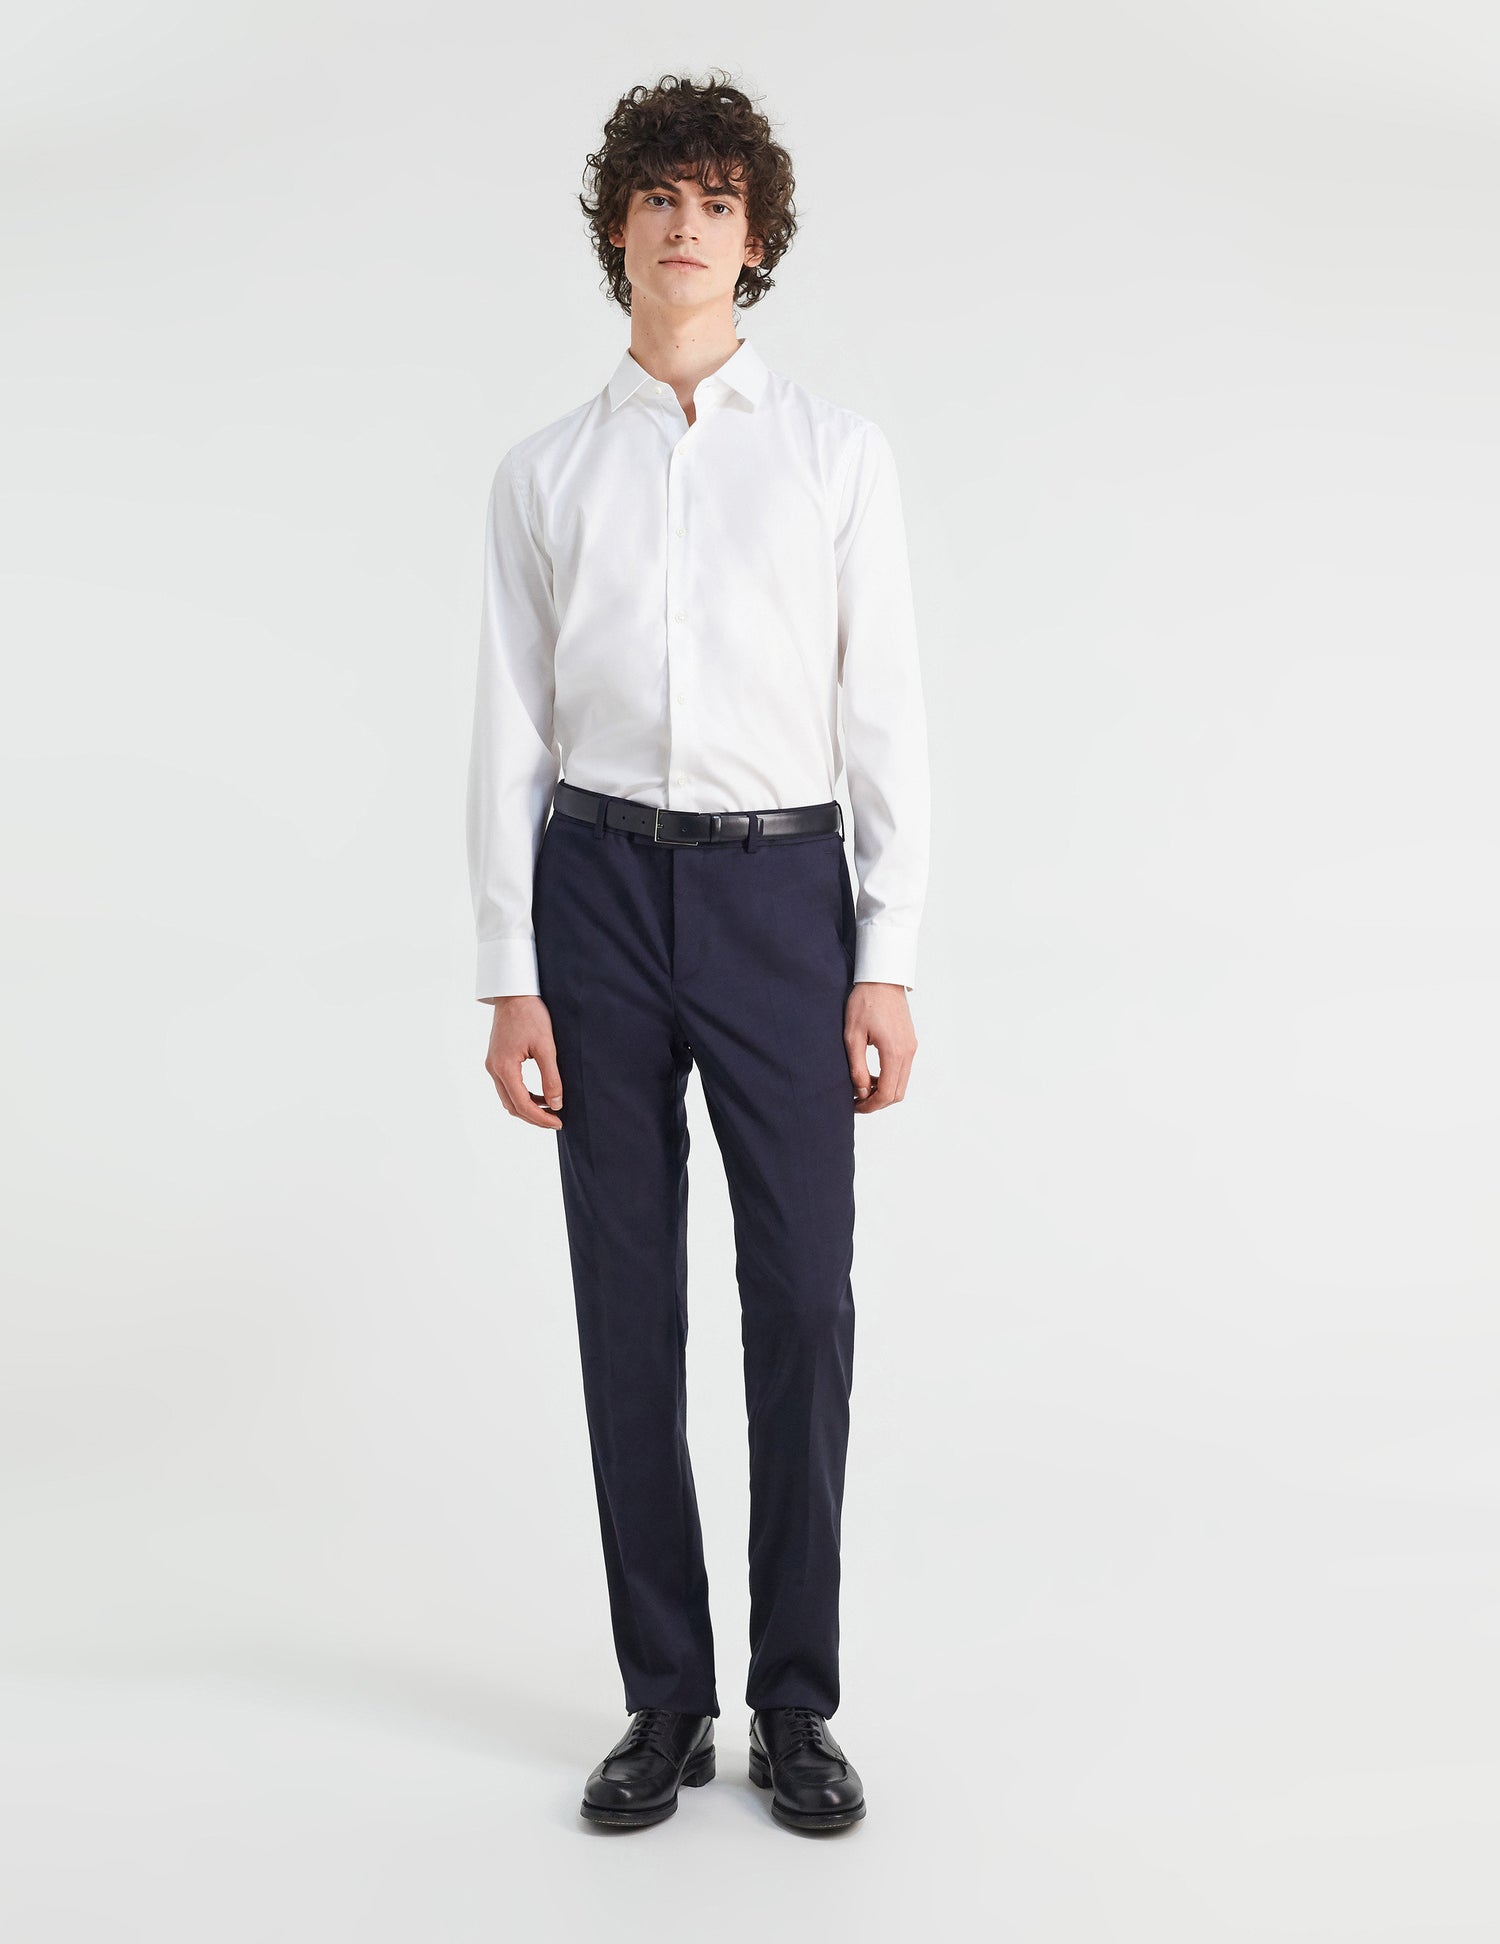 Semi-fitted white shirt - Pin point - Figaret Collar#5